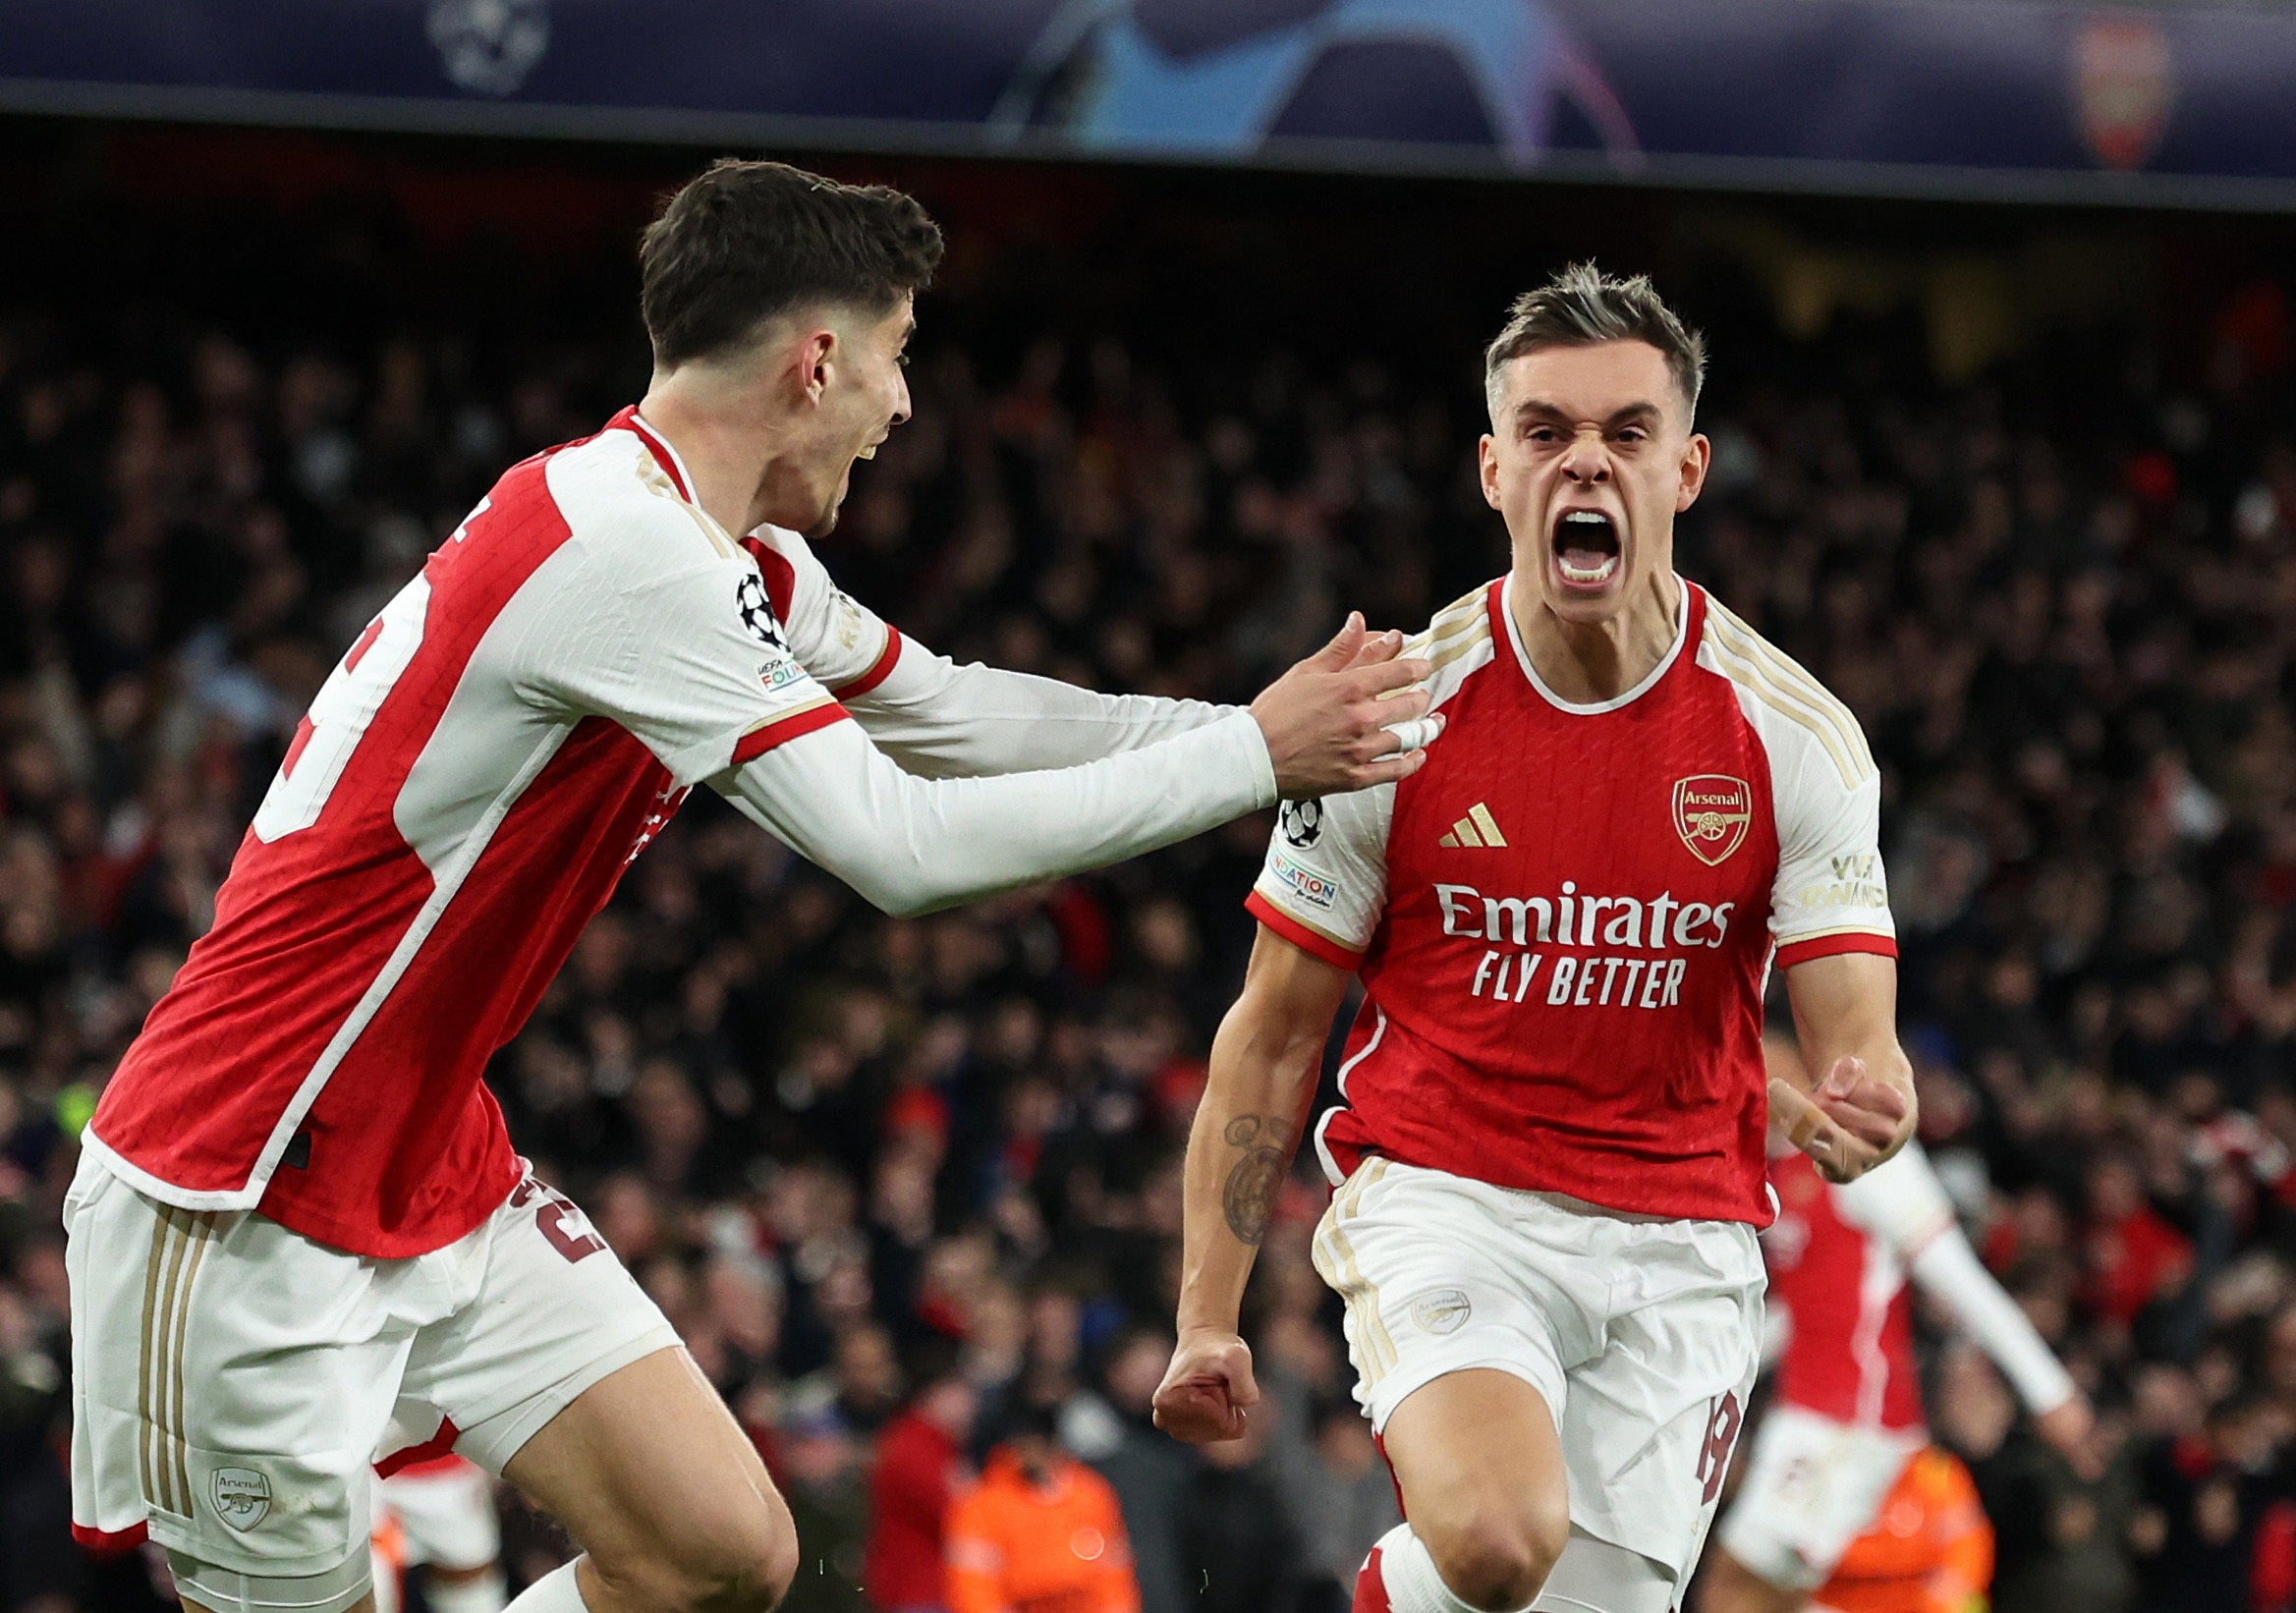 Leandro Trossard’s equaliser at the Emirates Stadium has built belief that Arsenal can beat Bayern.